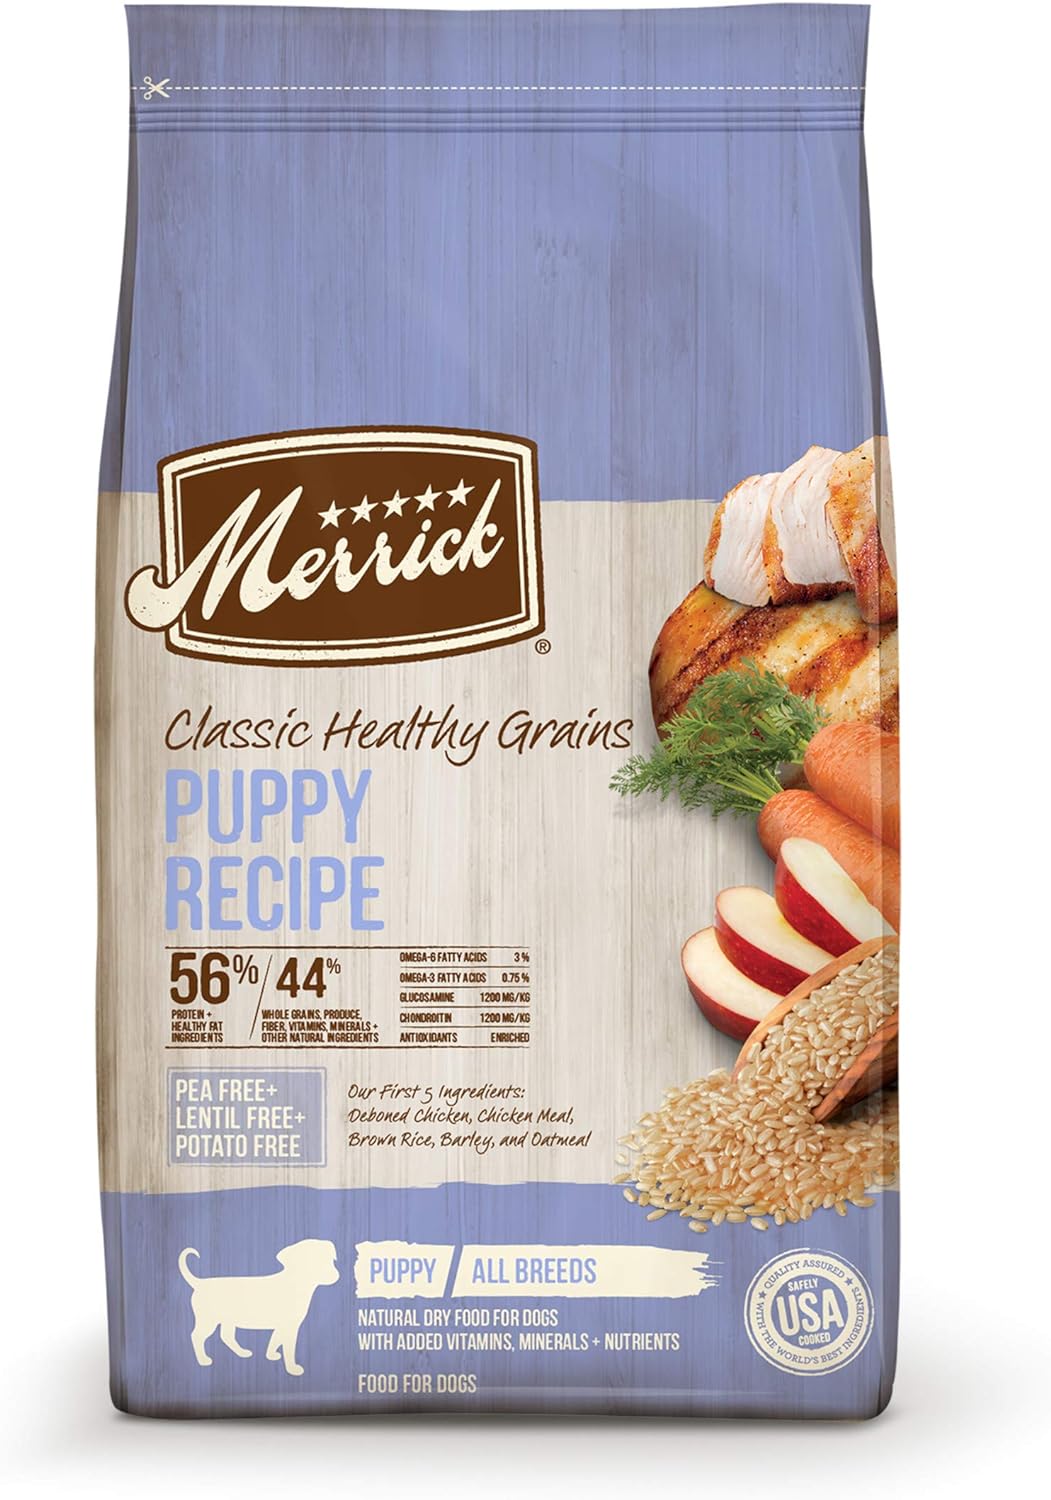 Merrick Classic Healthy Grains Puppy Recipe Dry Dog Food – Gallery Image 1